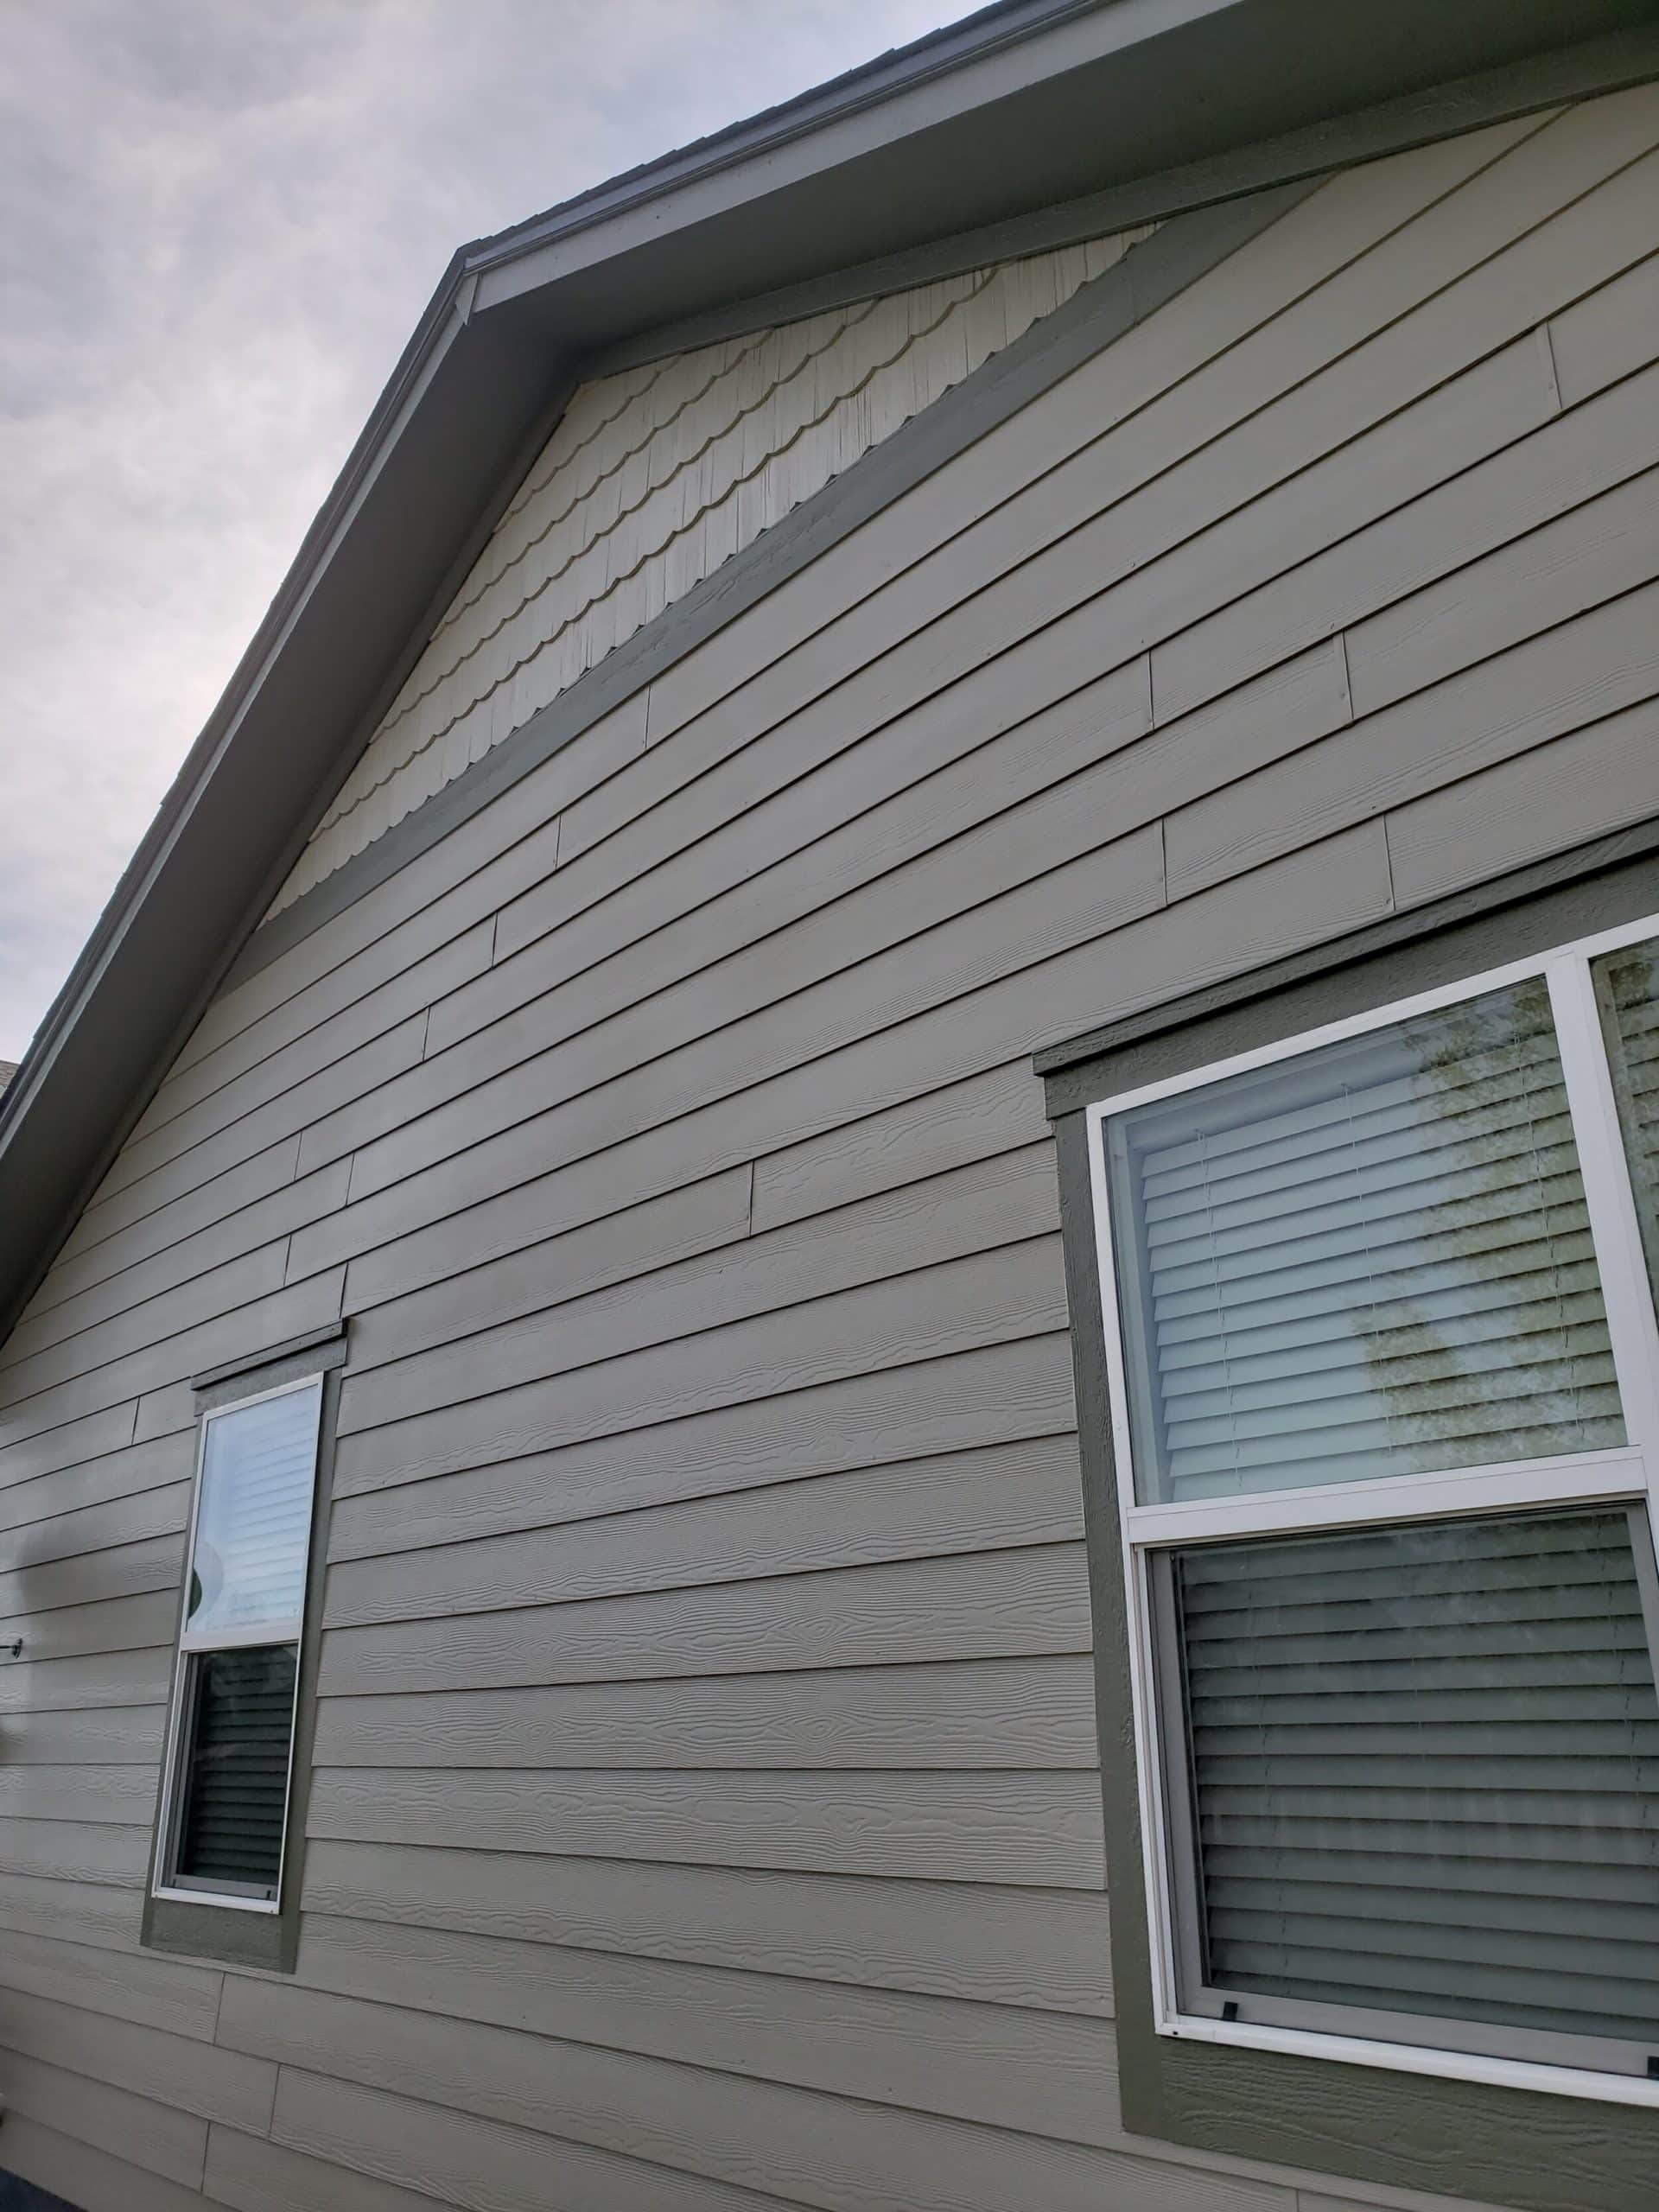 Outdoor close-up showing windows and siding of a home